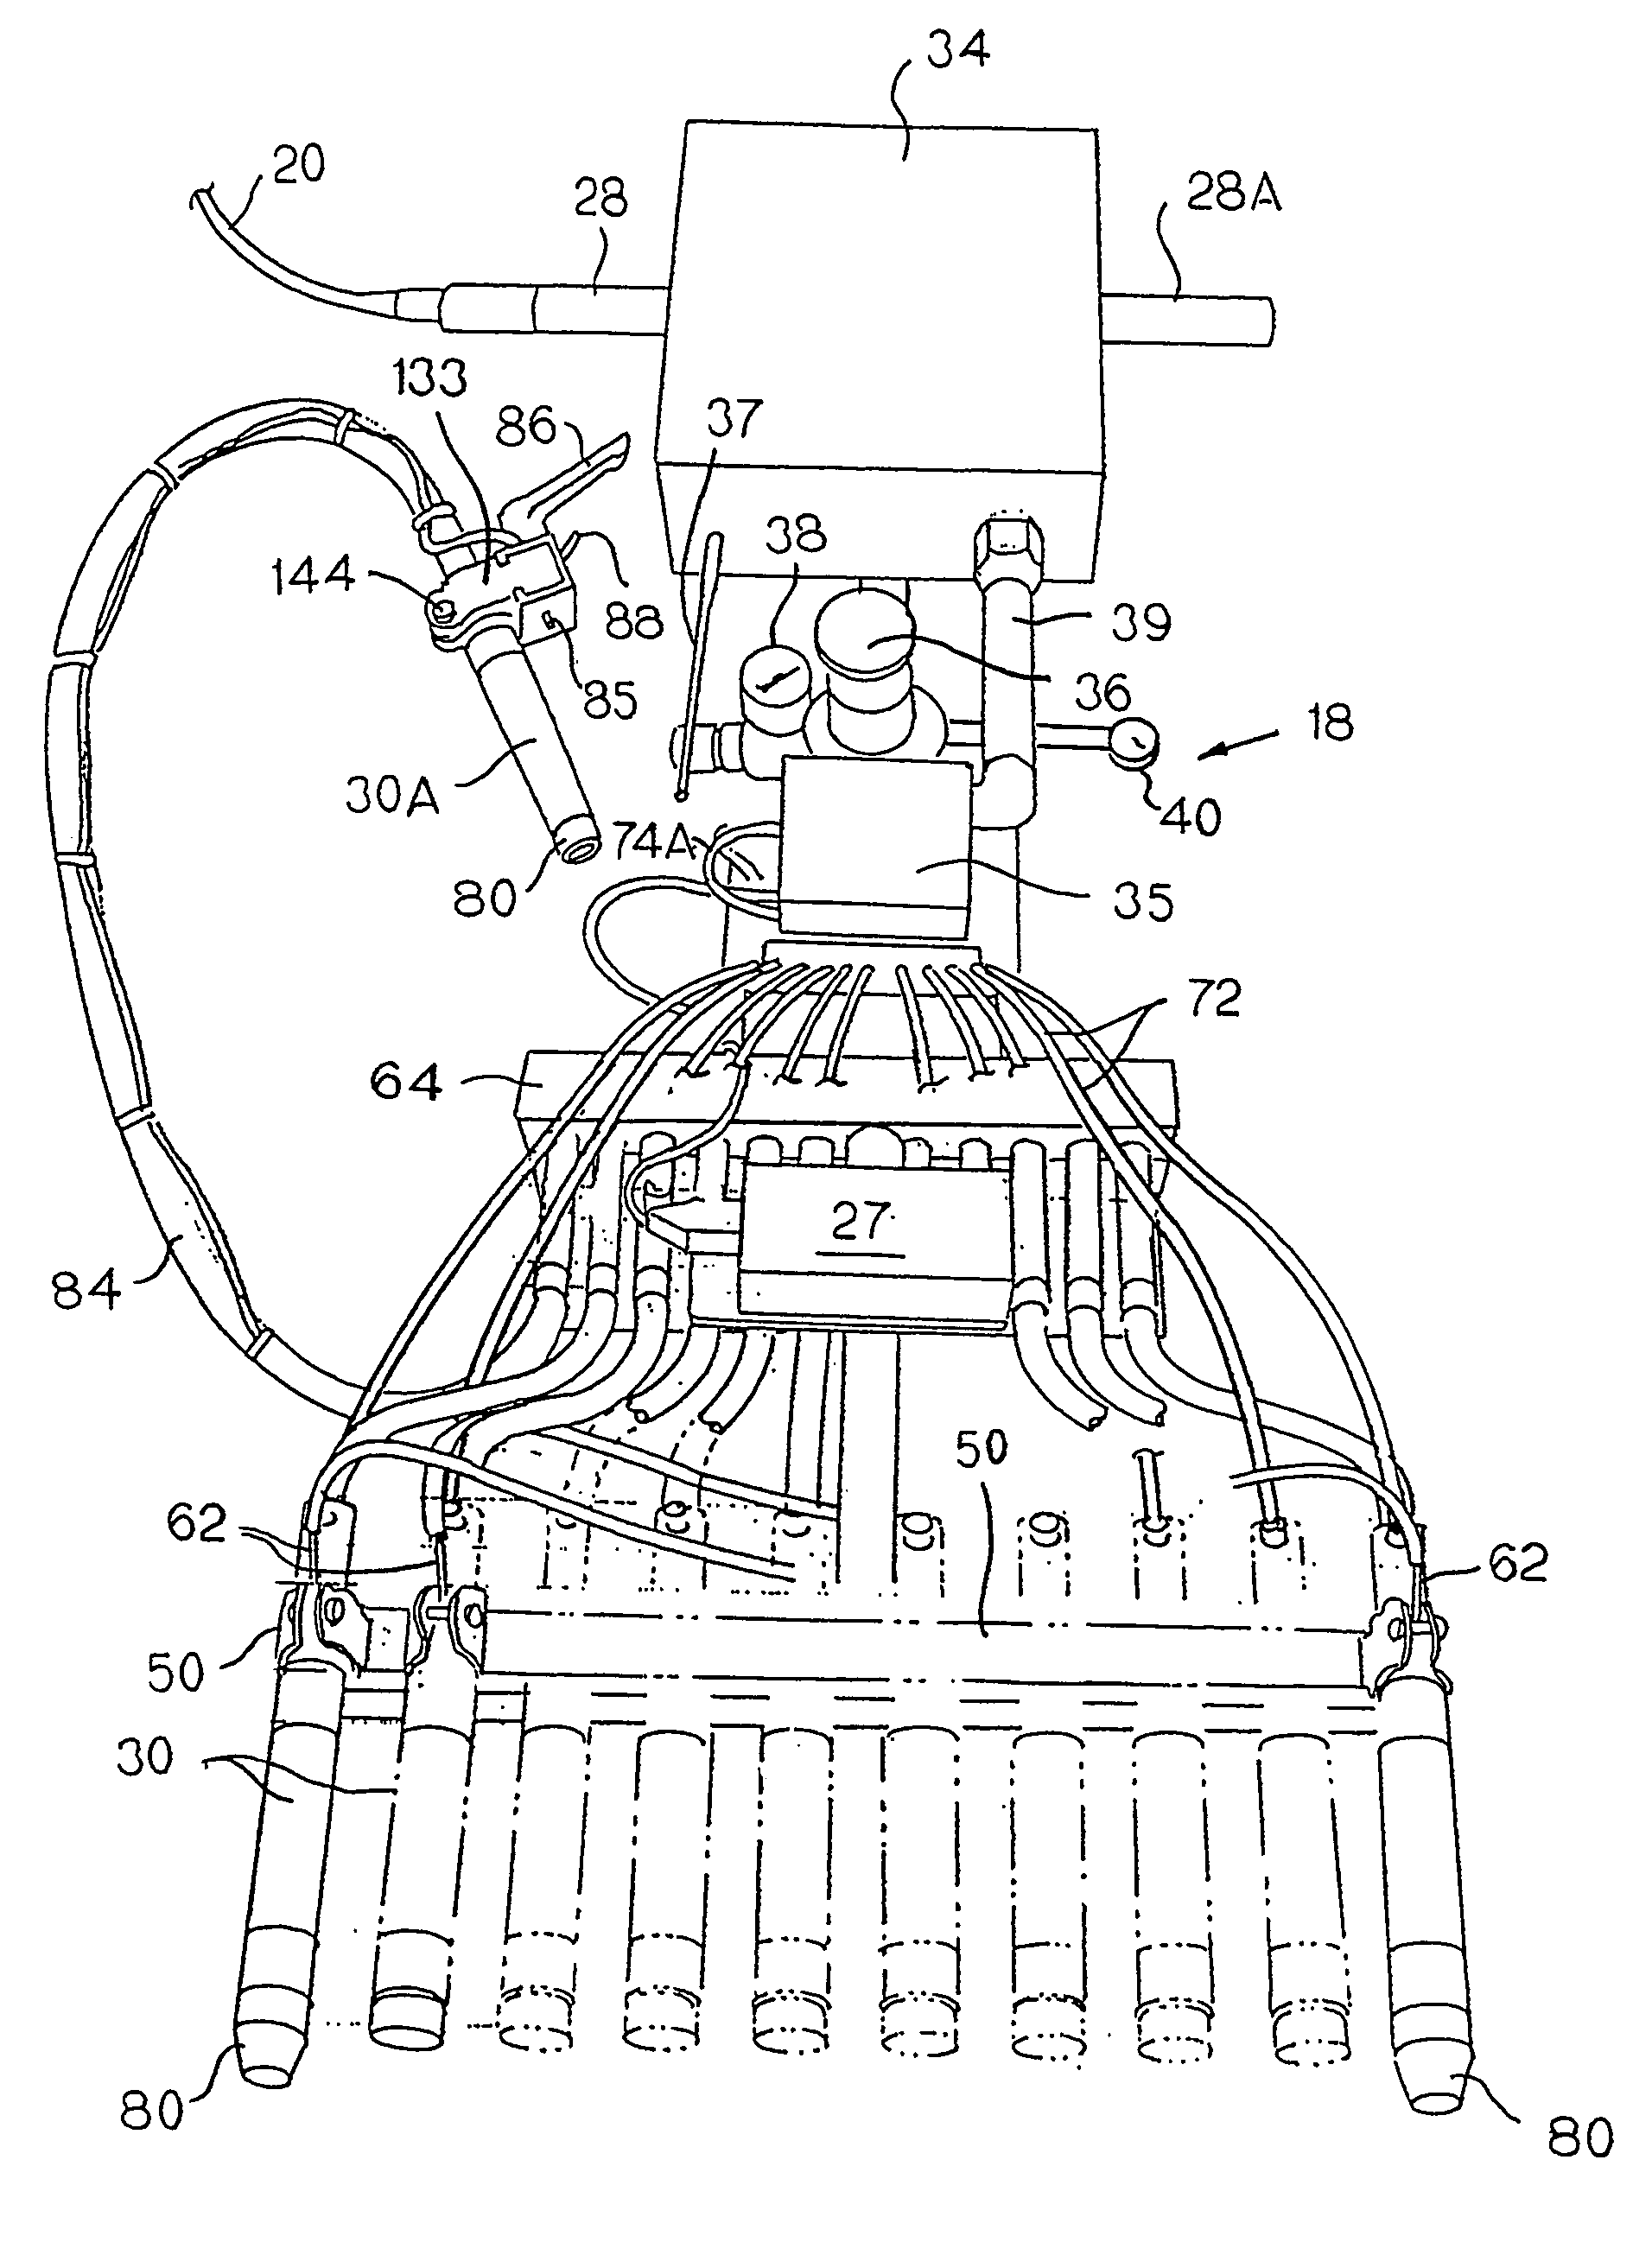 Method for measuring and displaying data for chemical reactor tubes